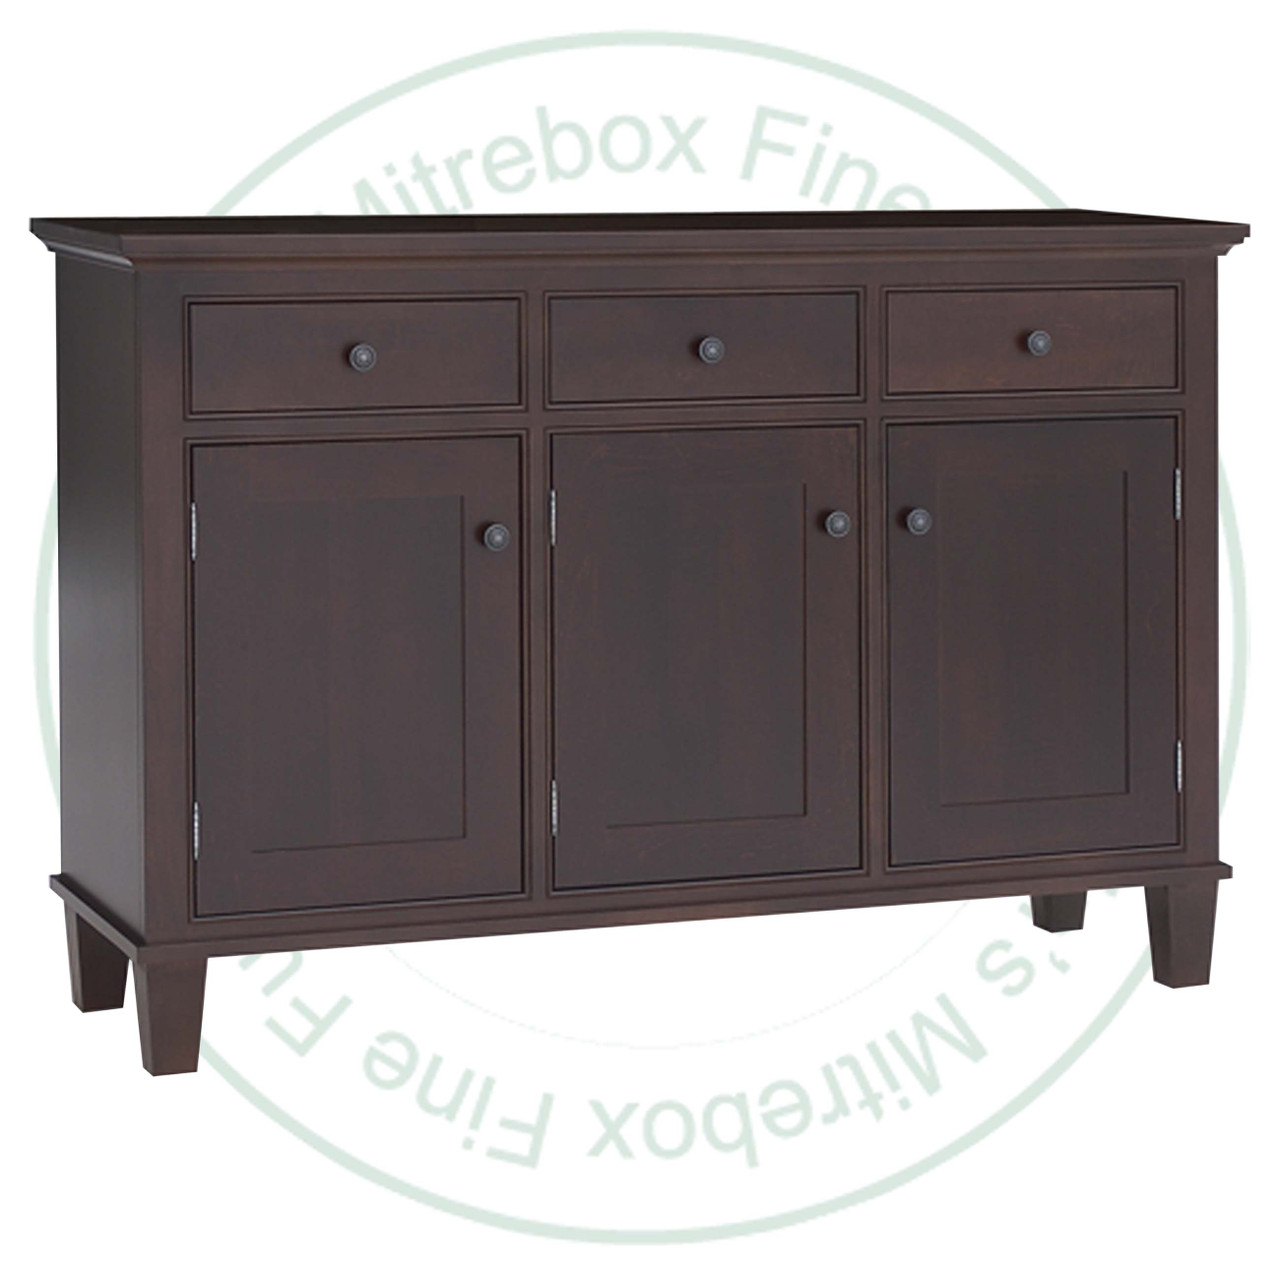 Pine Georgetown Sideboard 19.5'' Deep x 61.5'' Wide x 42'' High With 3 Wood Doors And 3 Drawers